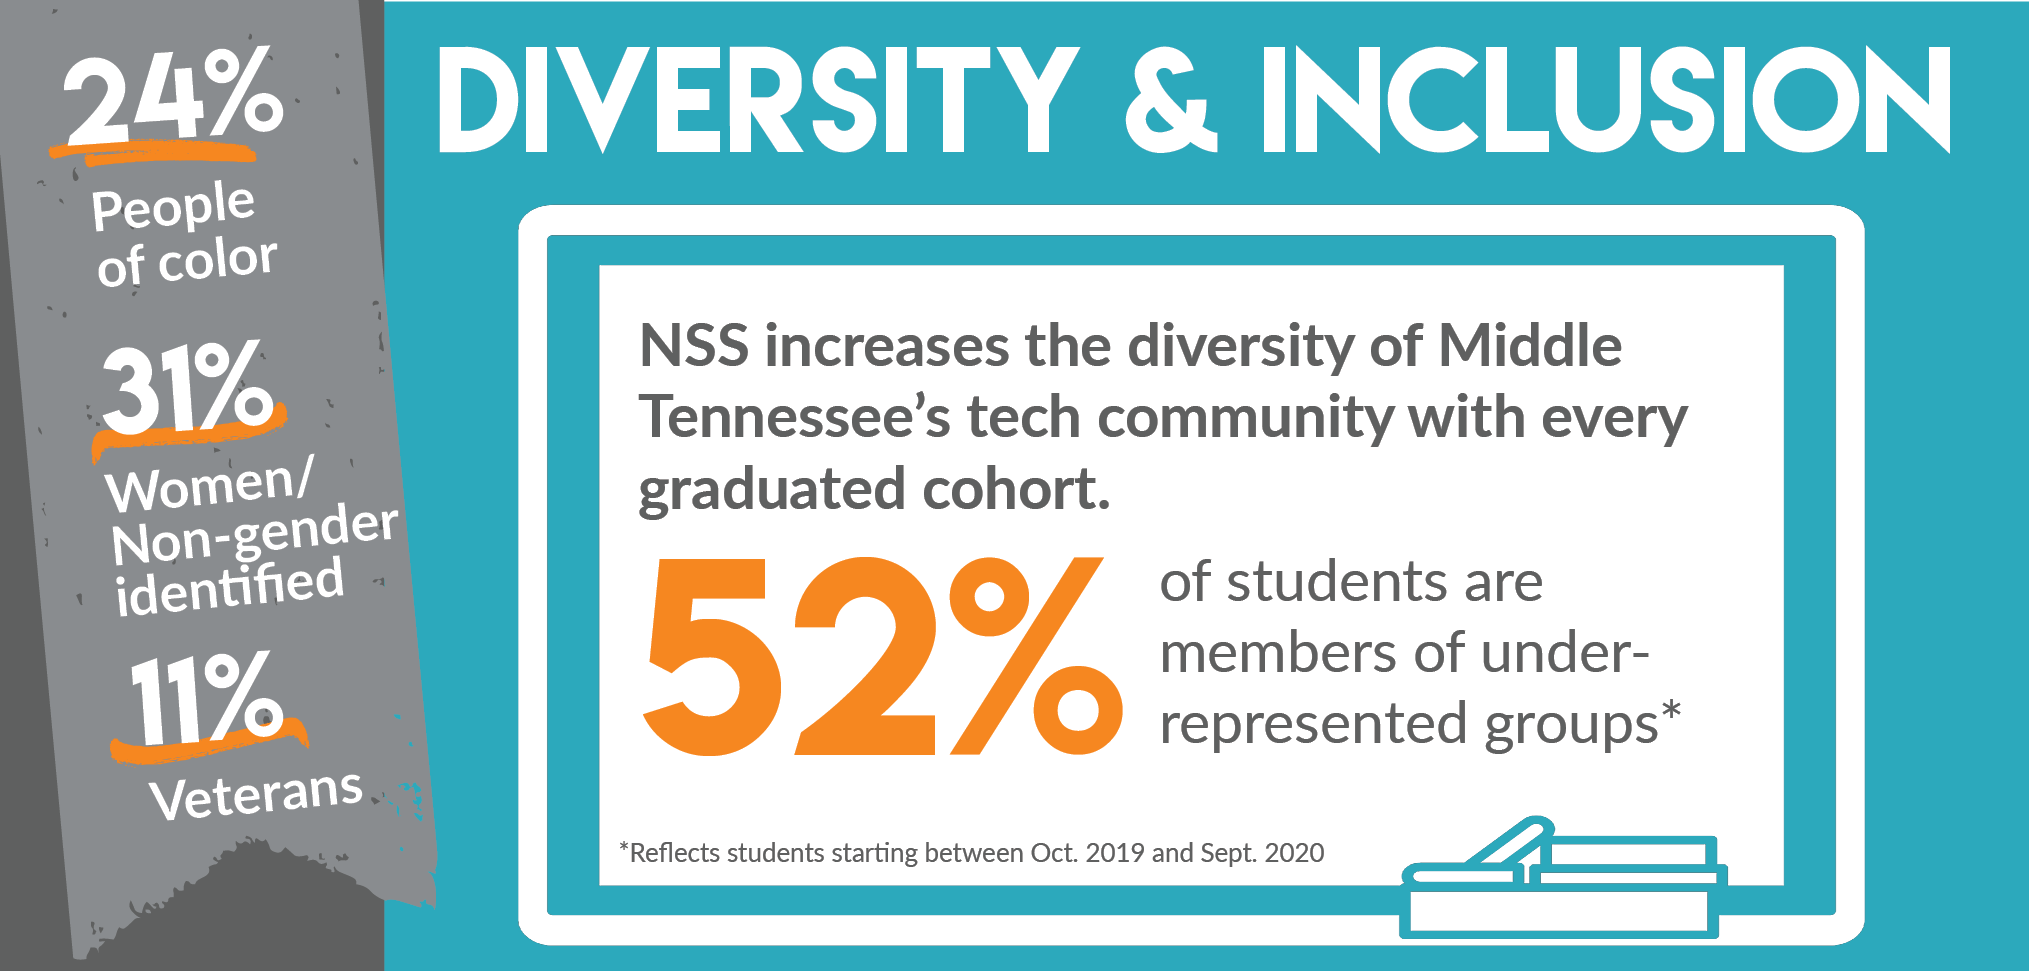 Diversity & Inclusion - 52% of students are members of under-represented groups